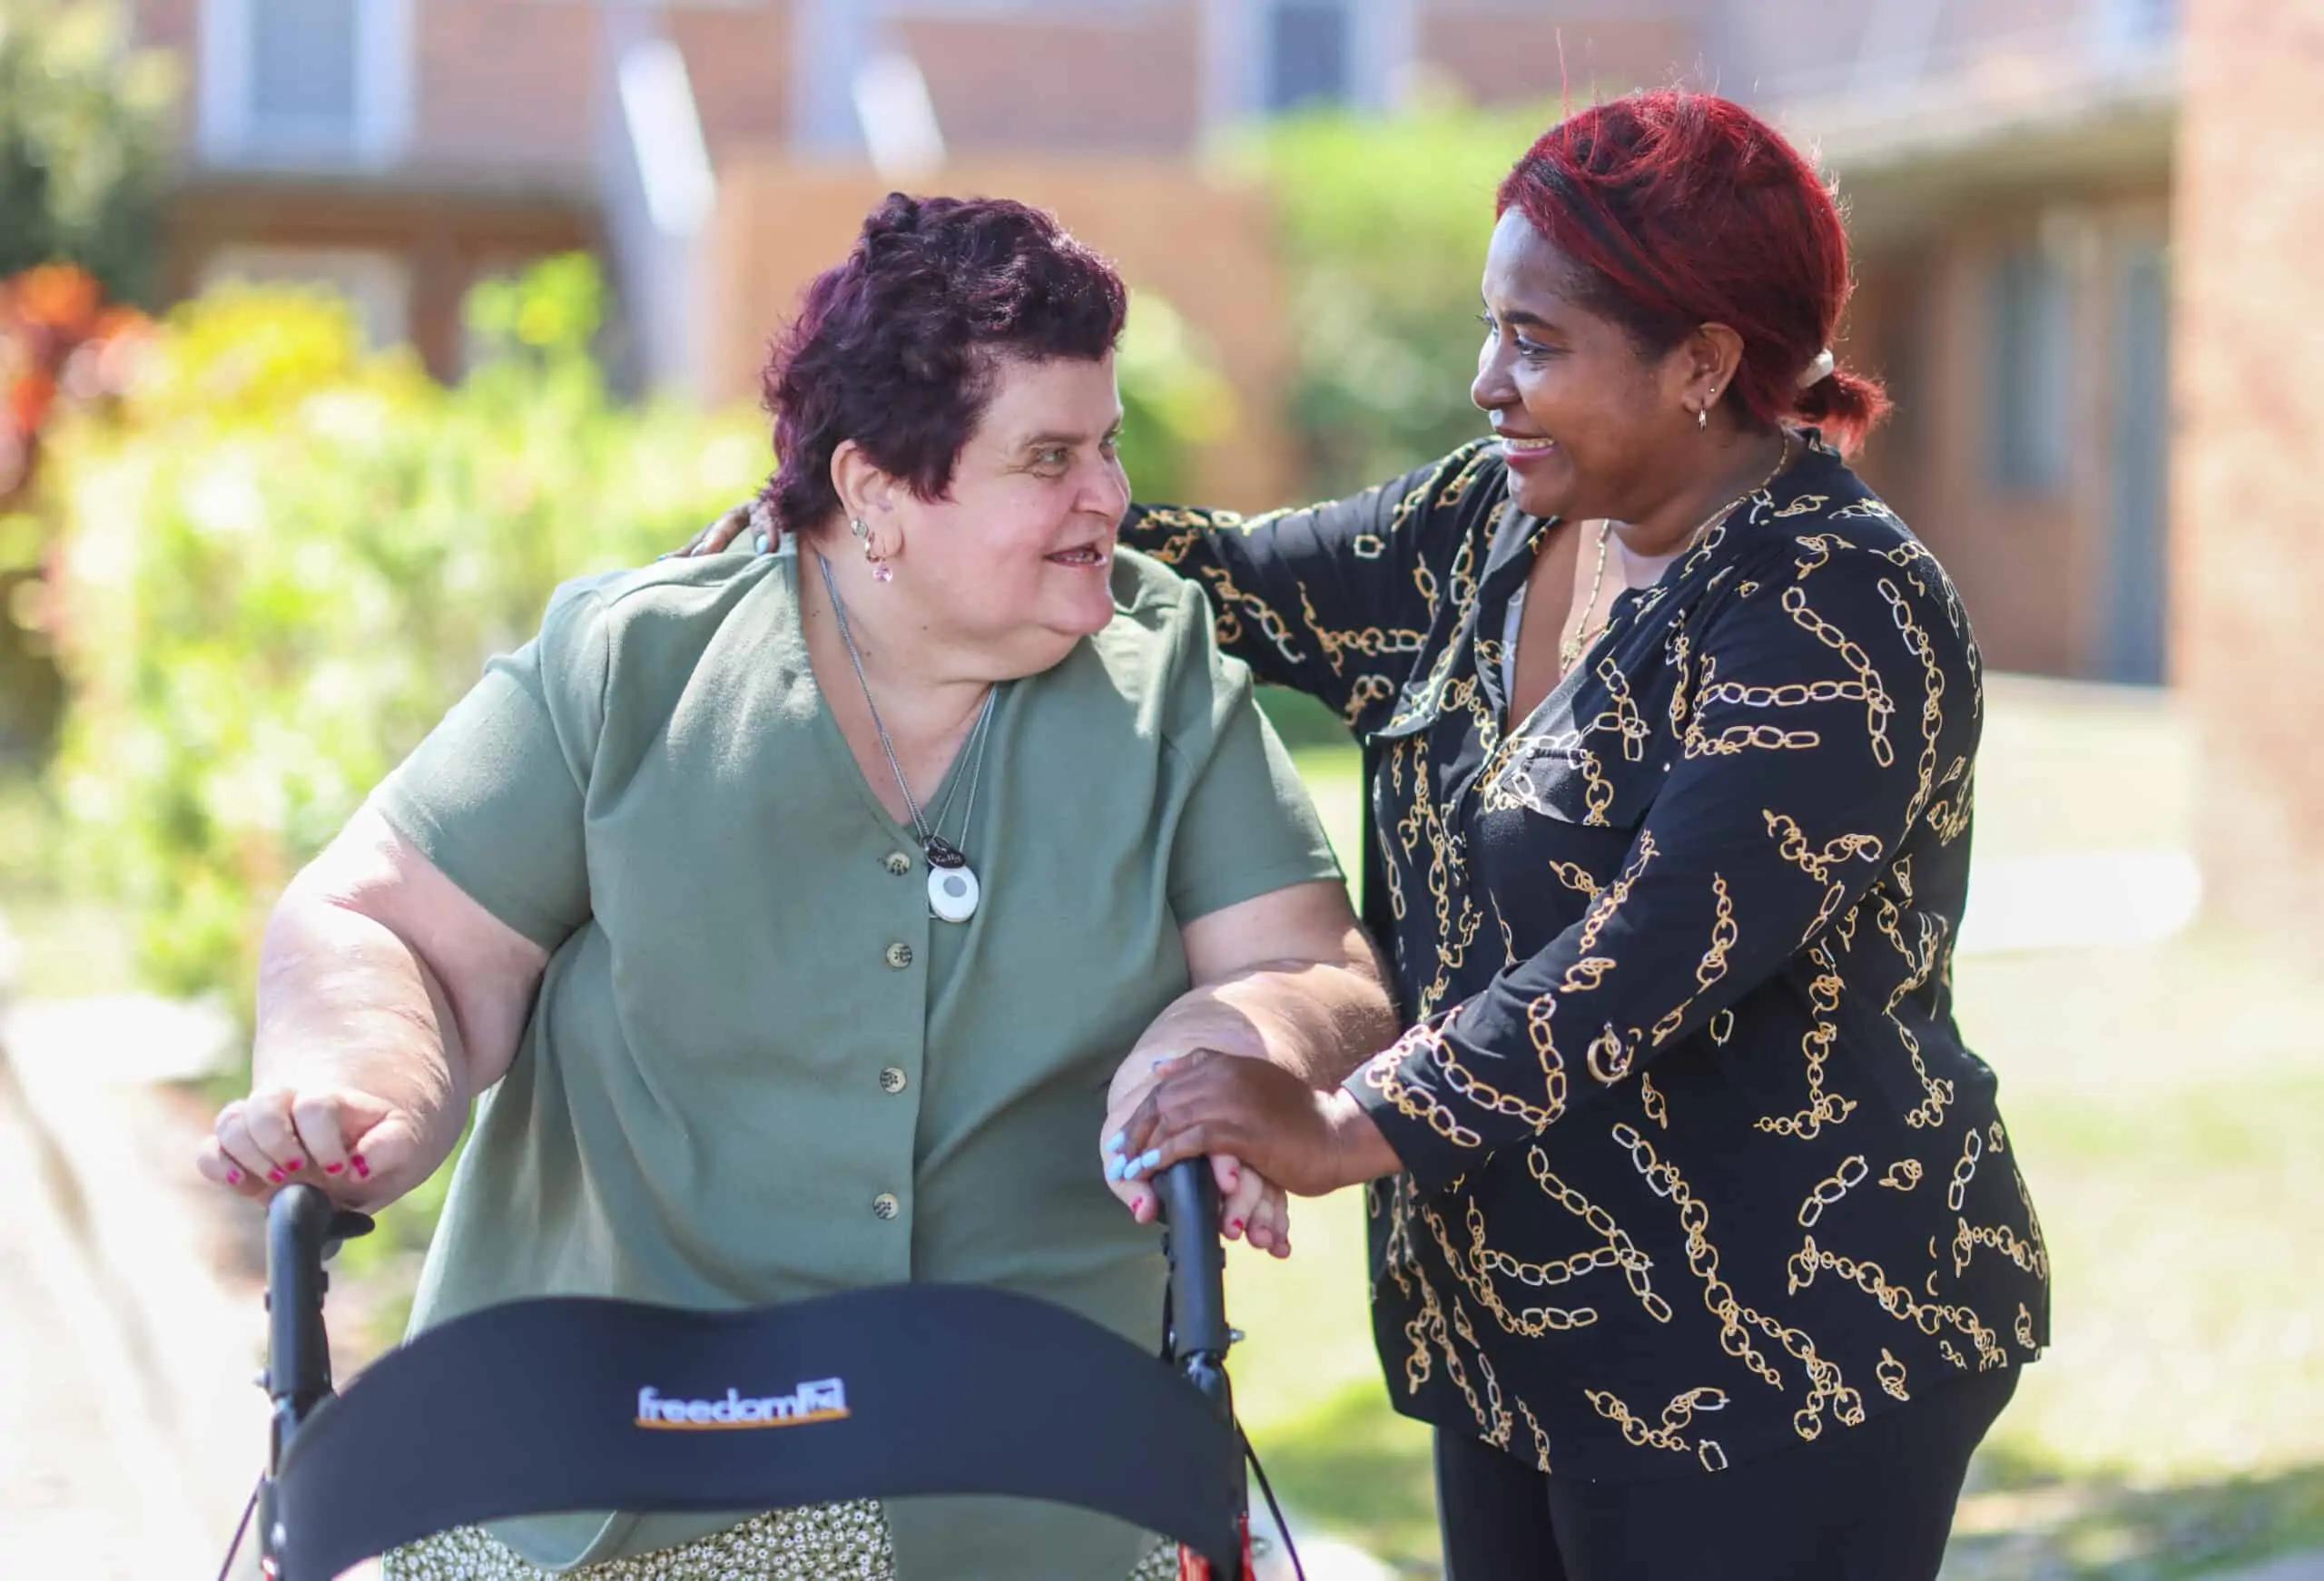 Woman with a walker being supported by personal carer